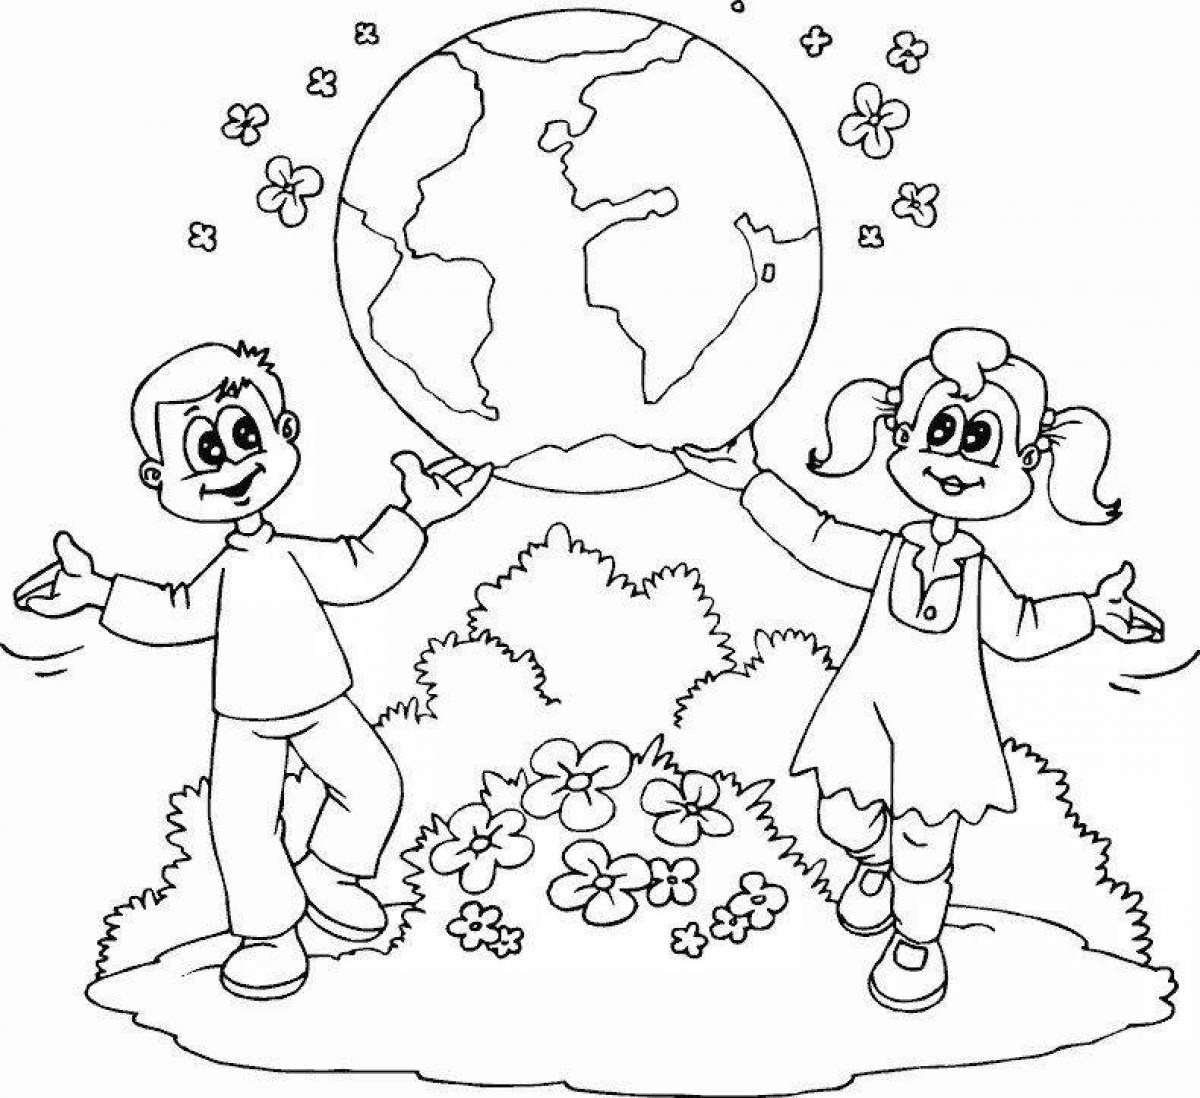 Glitter green friend coloring page